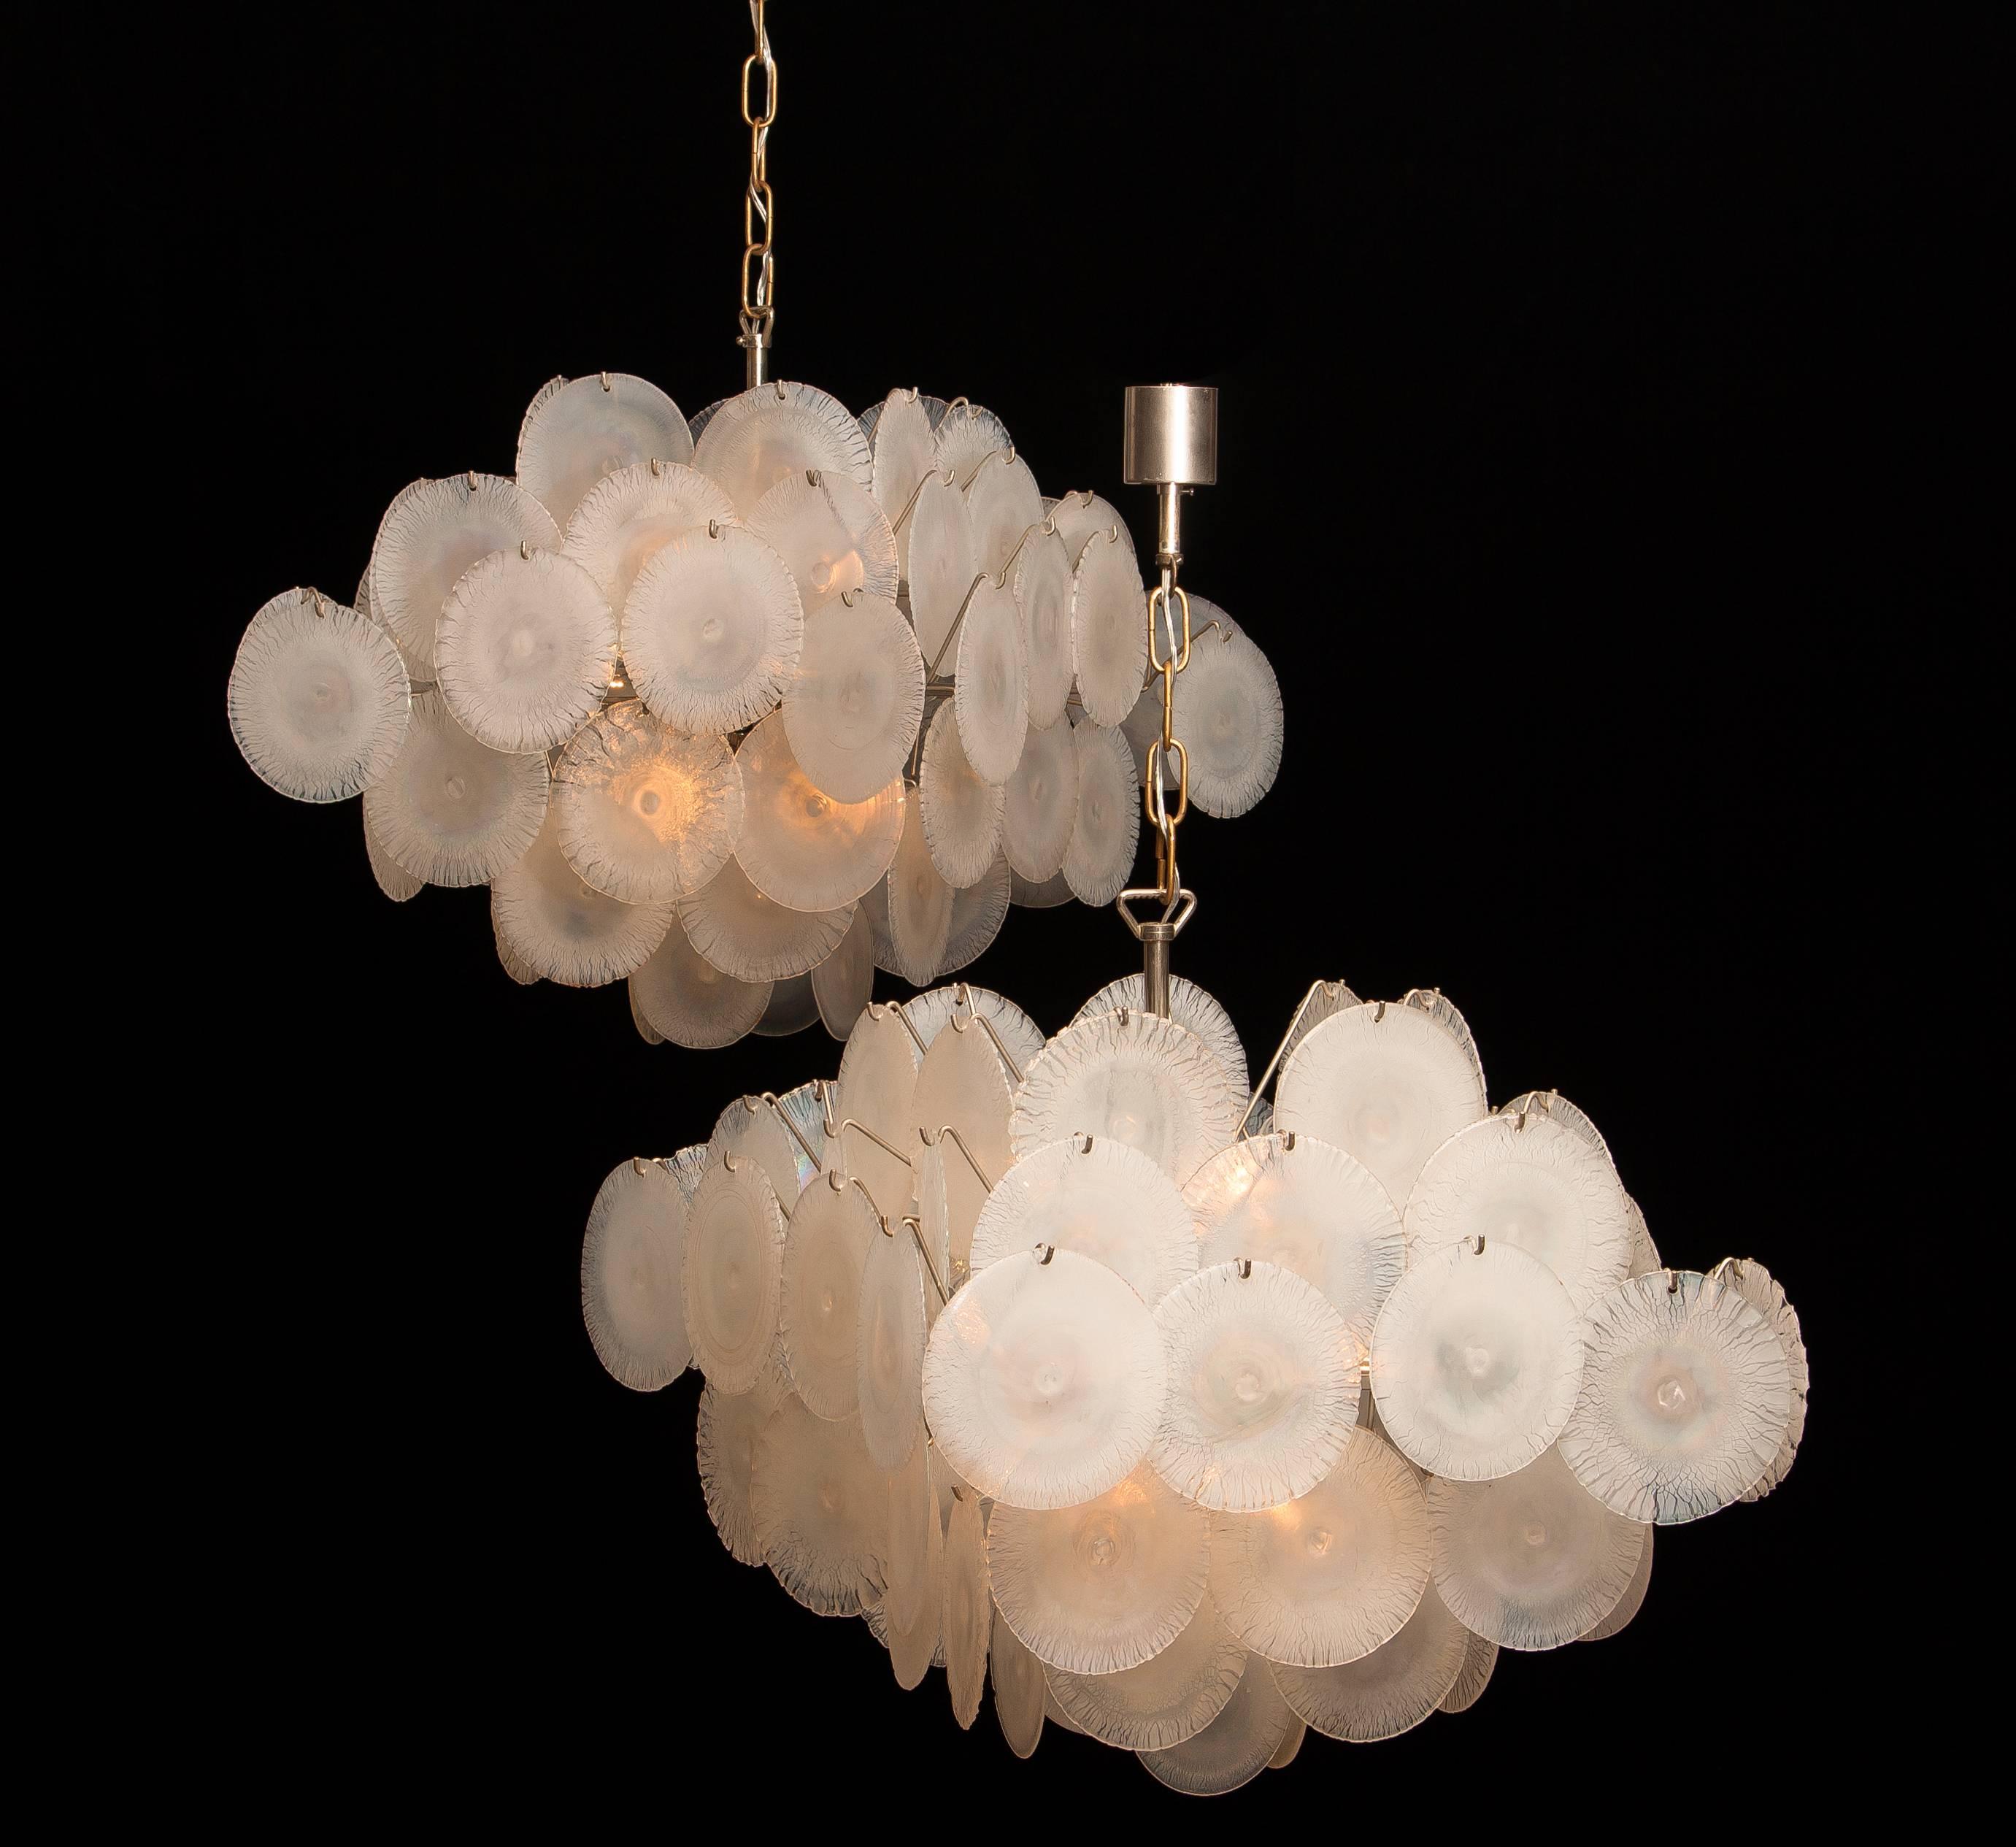 Set of Two Gino Vistosi Chandeliers with White / Pearl Murano Crystal Discs 1